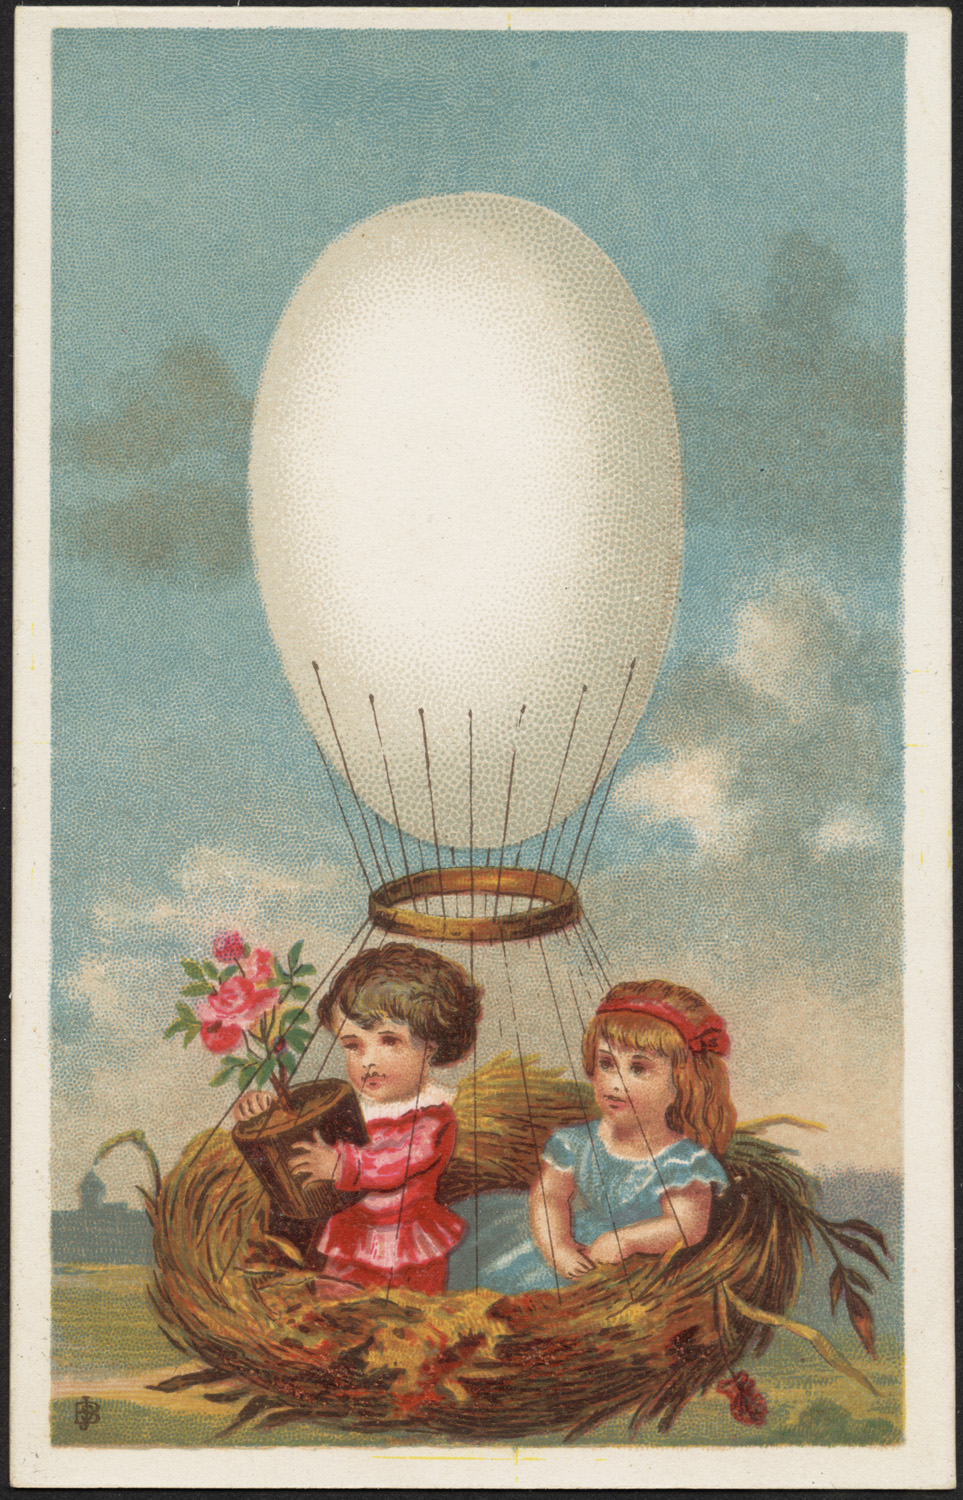 two young children are on a small air balloon